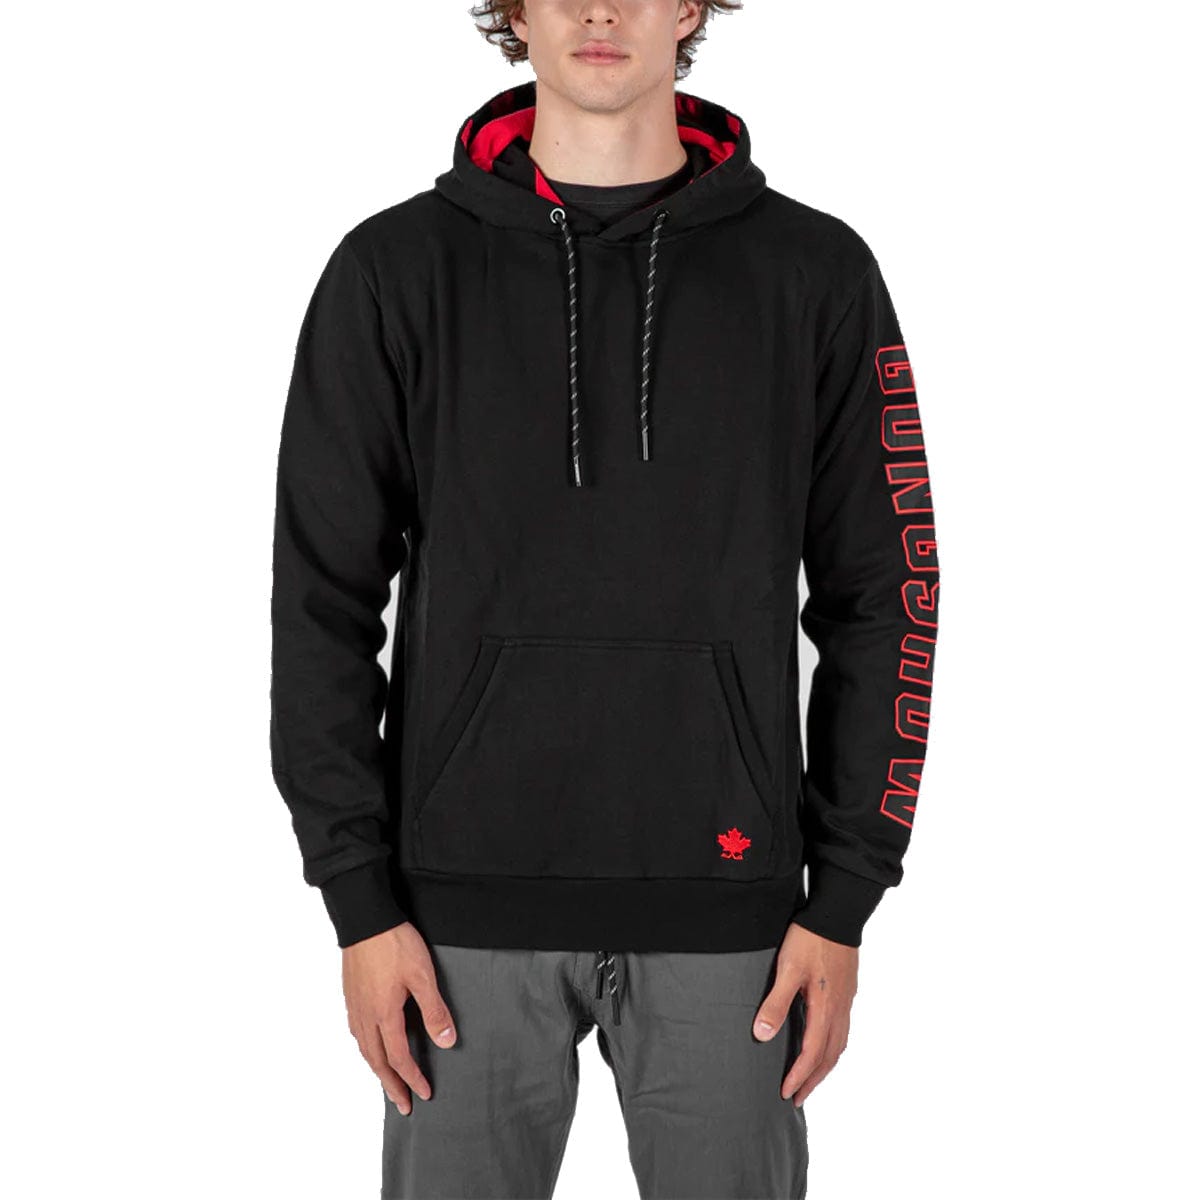 Gongshow Hockey Proud Nation Hoody - The Hockey Shop Source For Sports